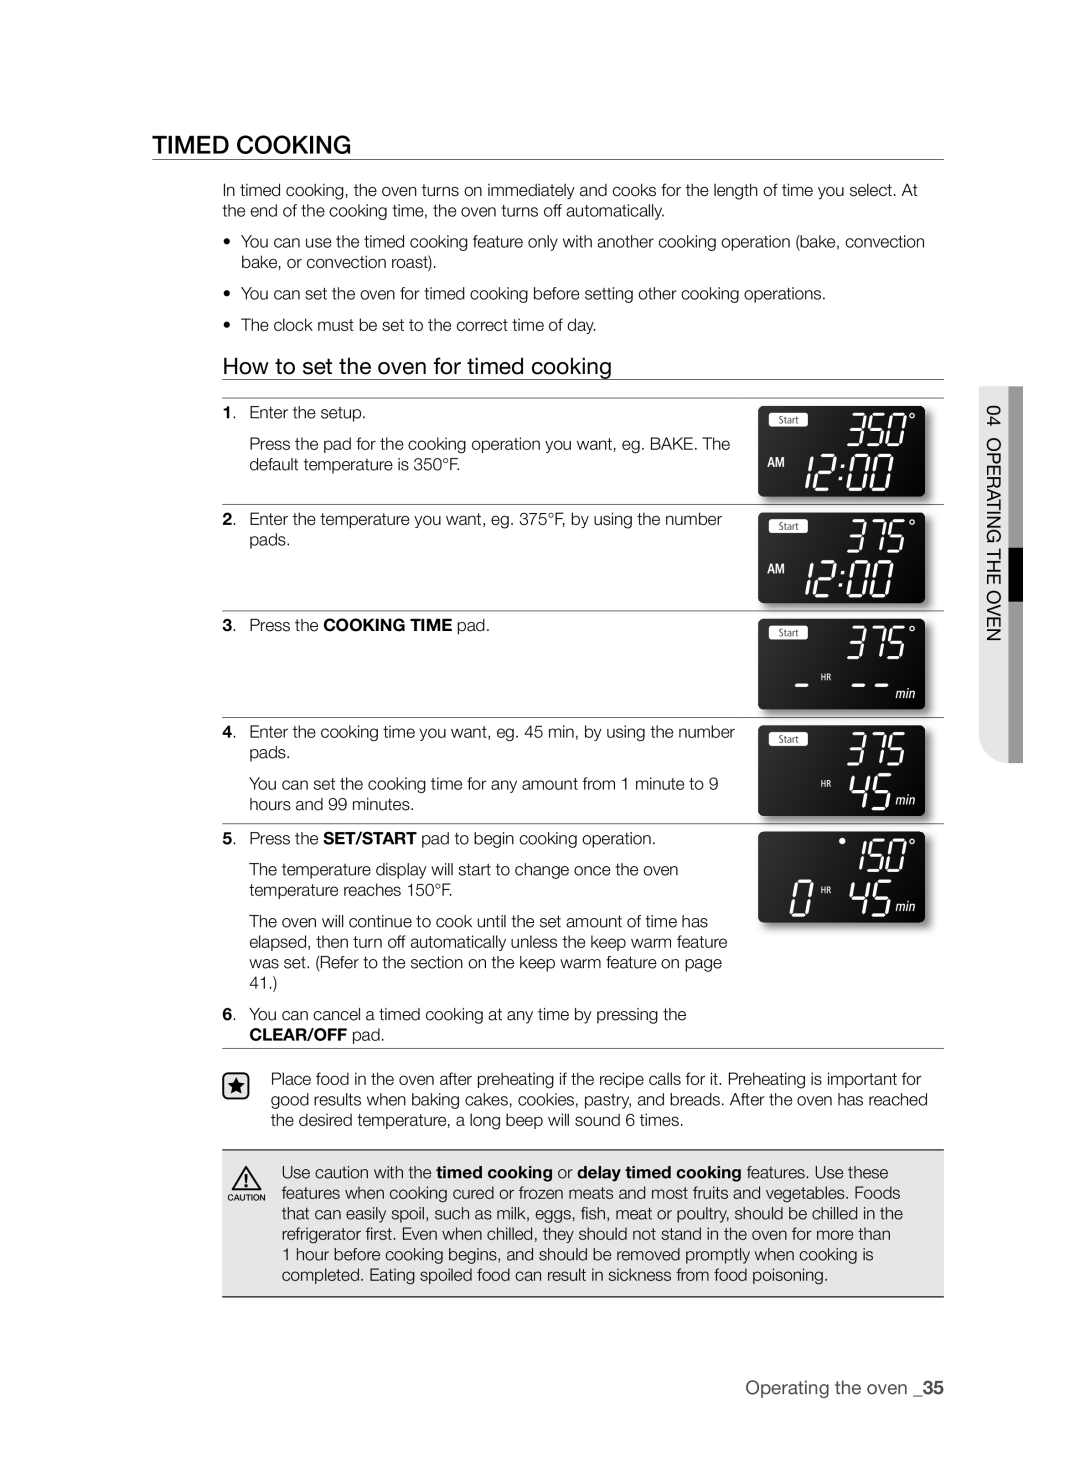 Samsung FE-R500WW user manual Timed cooking, How to set the oven for timed cooking, Operating The Oven, Operating the oven 